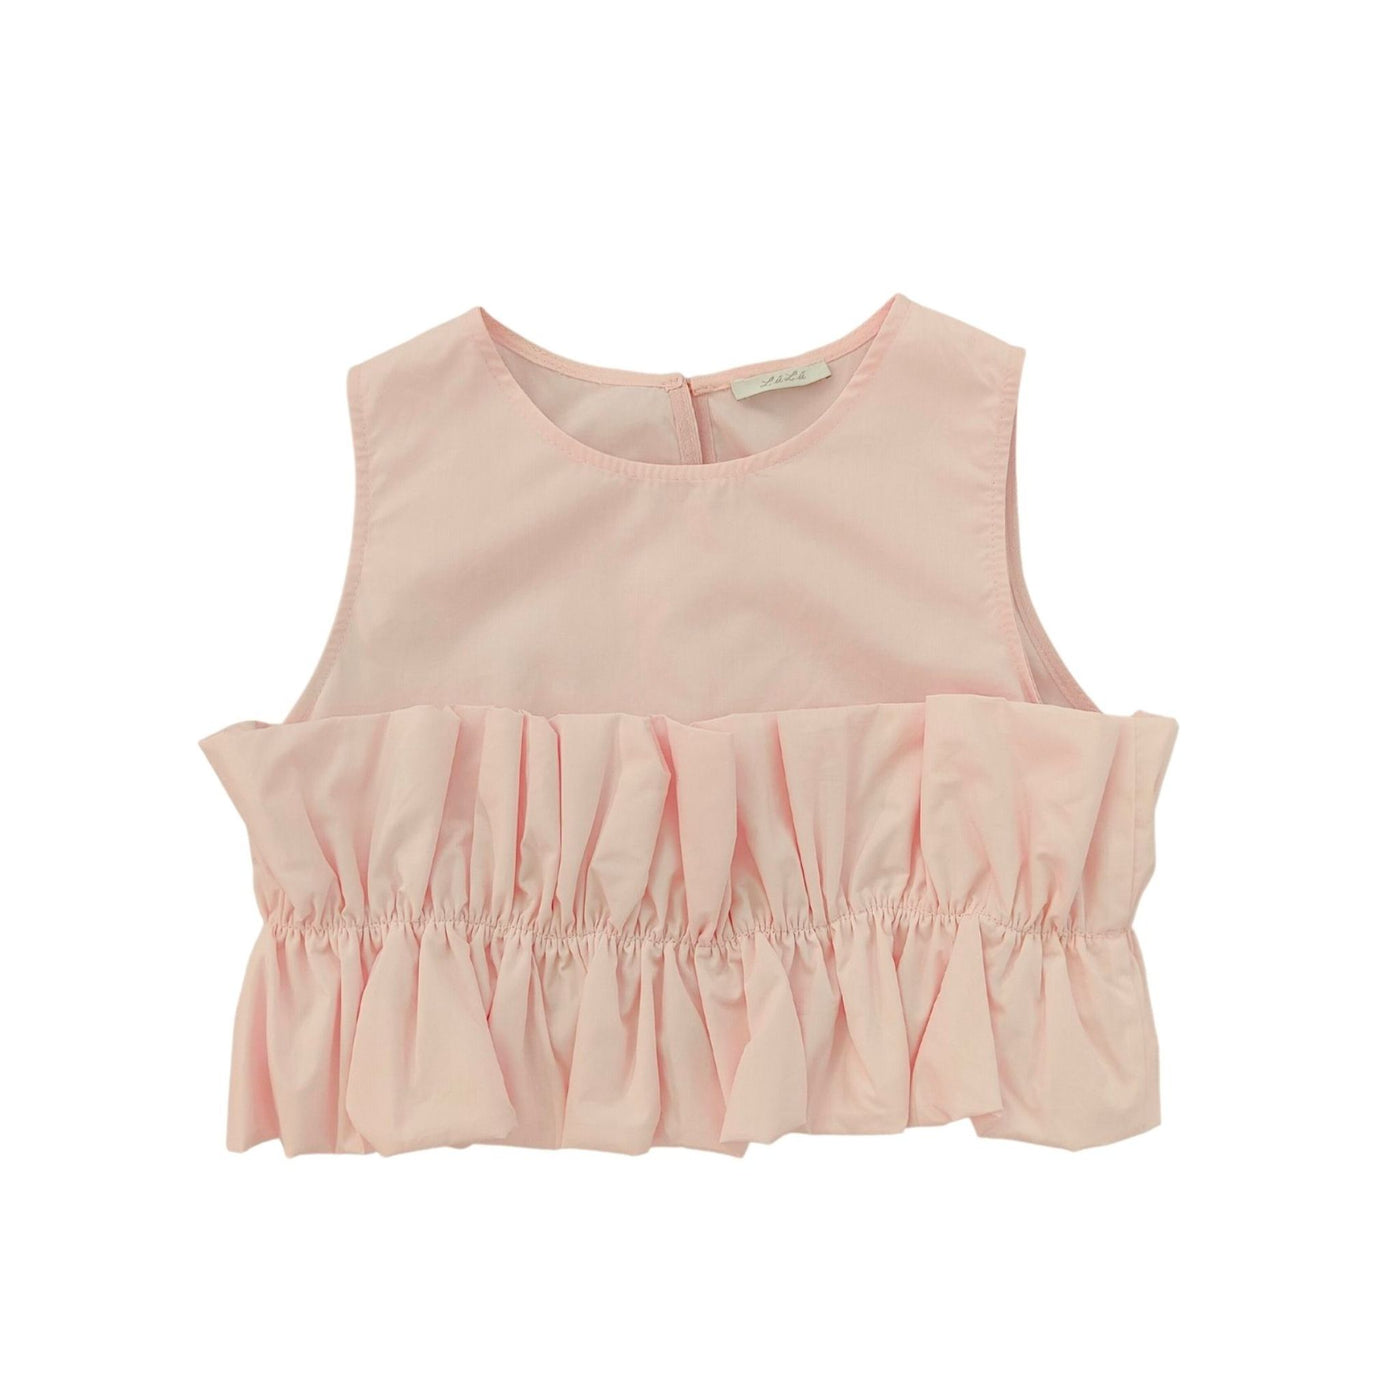 Top for girls 6-12 years with flounces